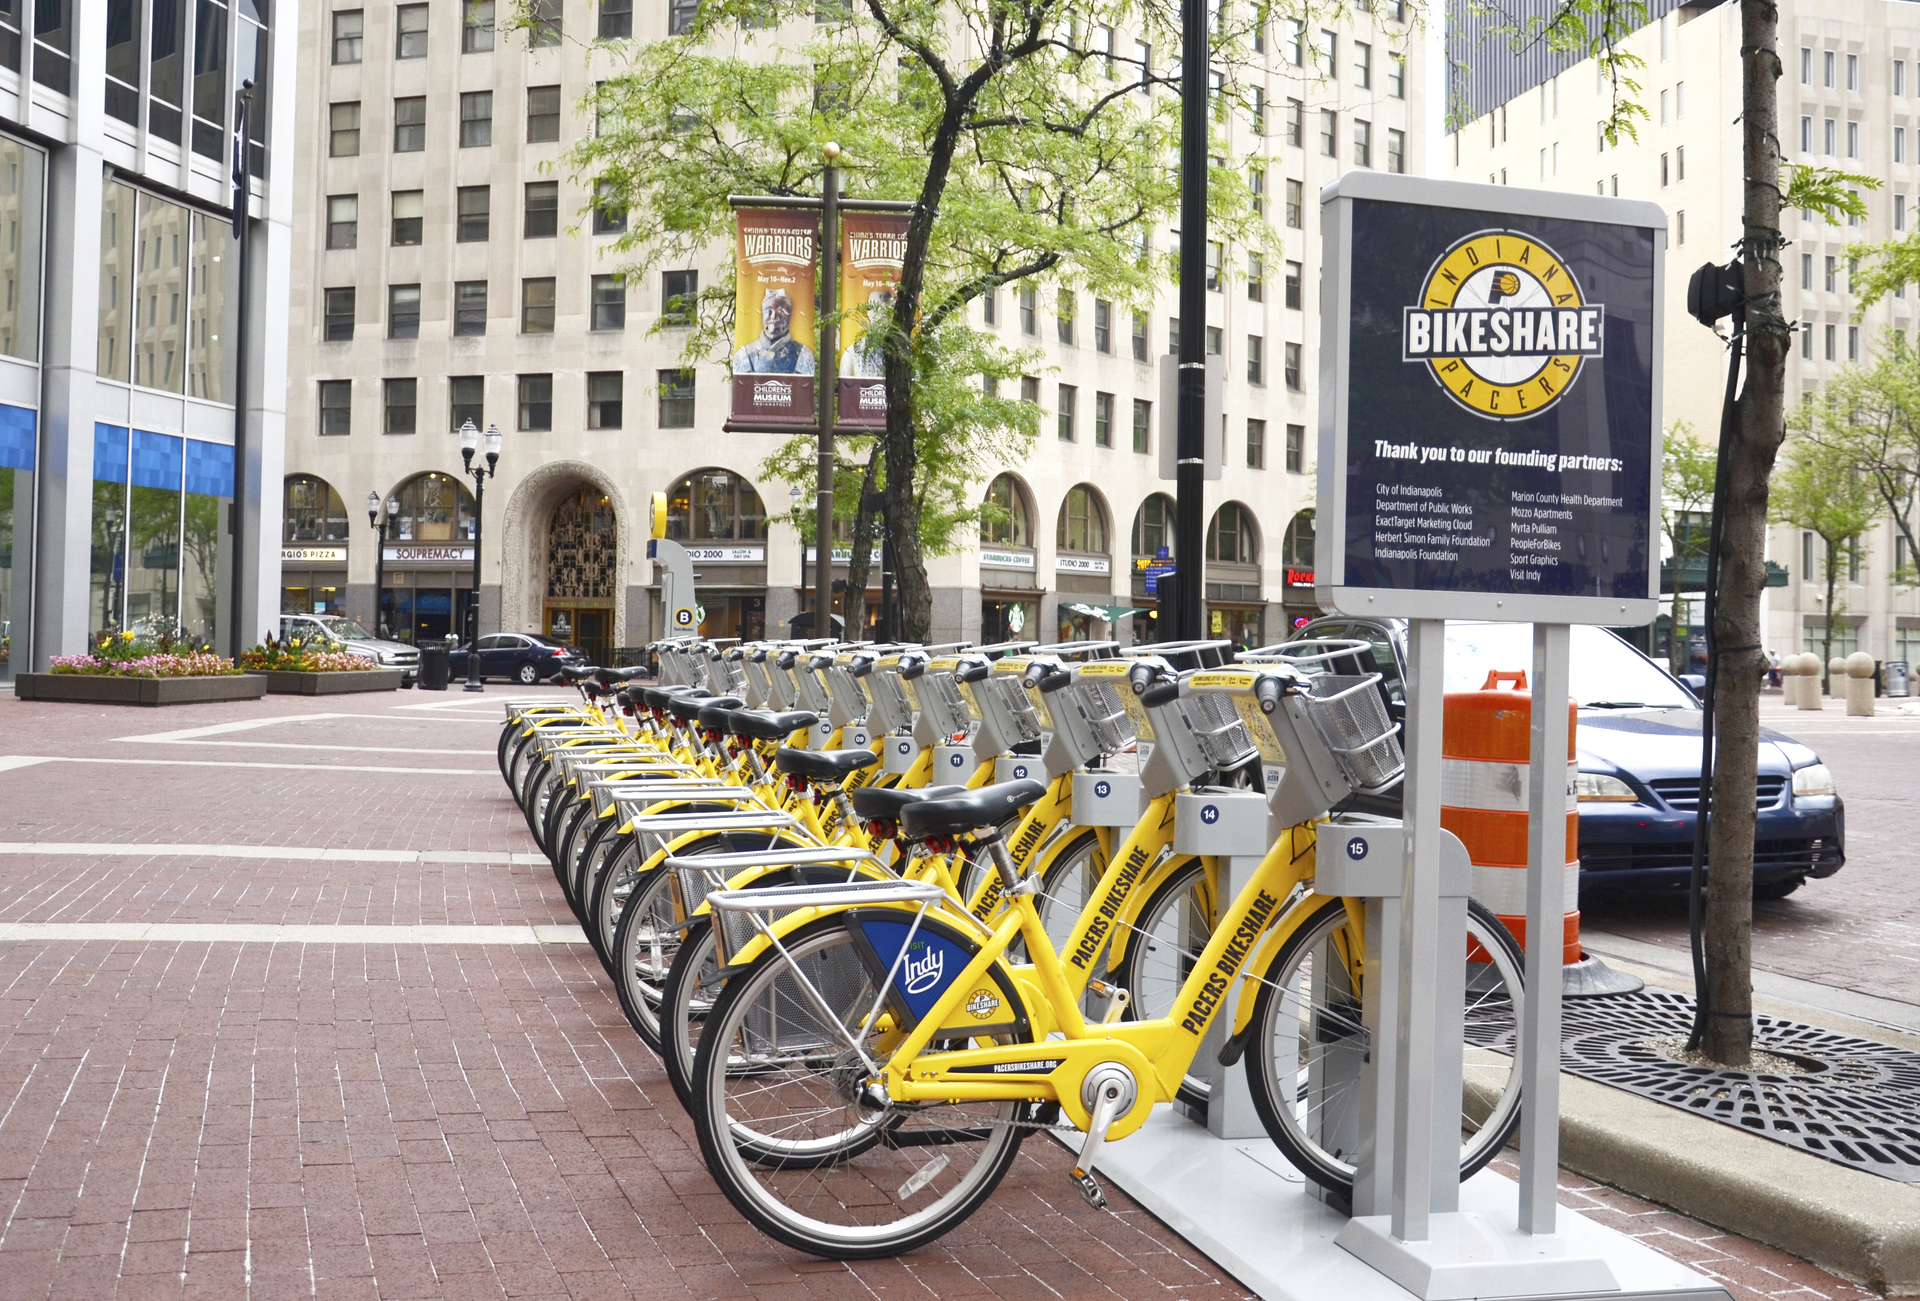 City bikes lined up in rack